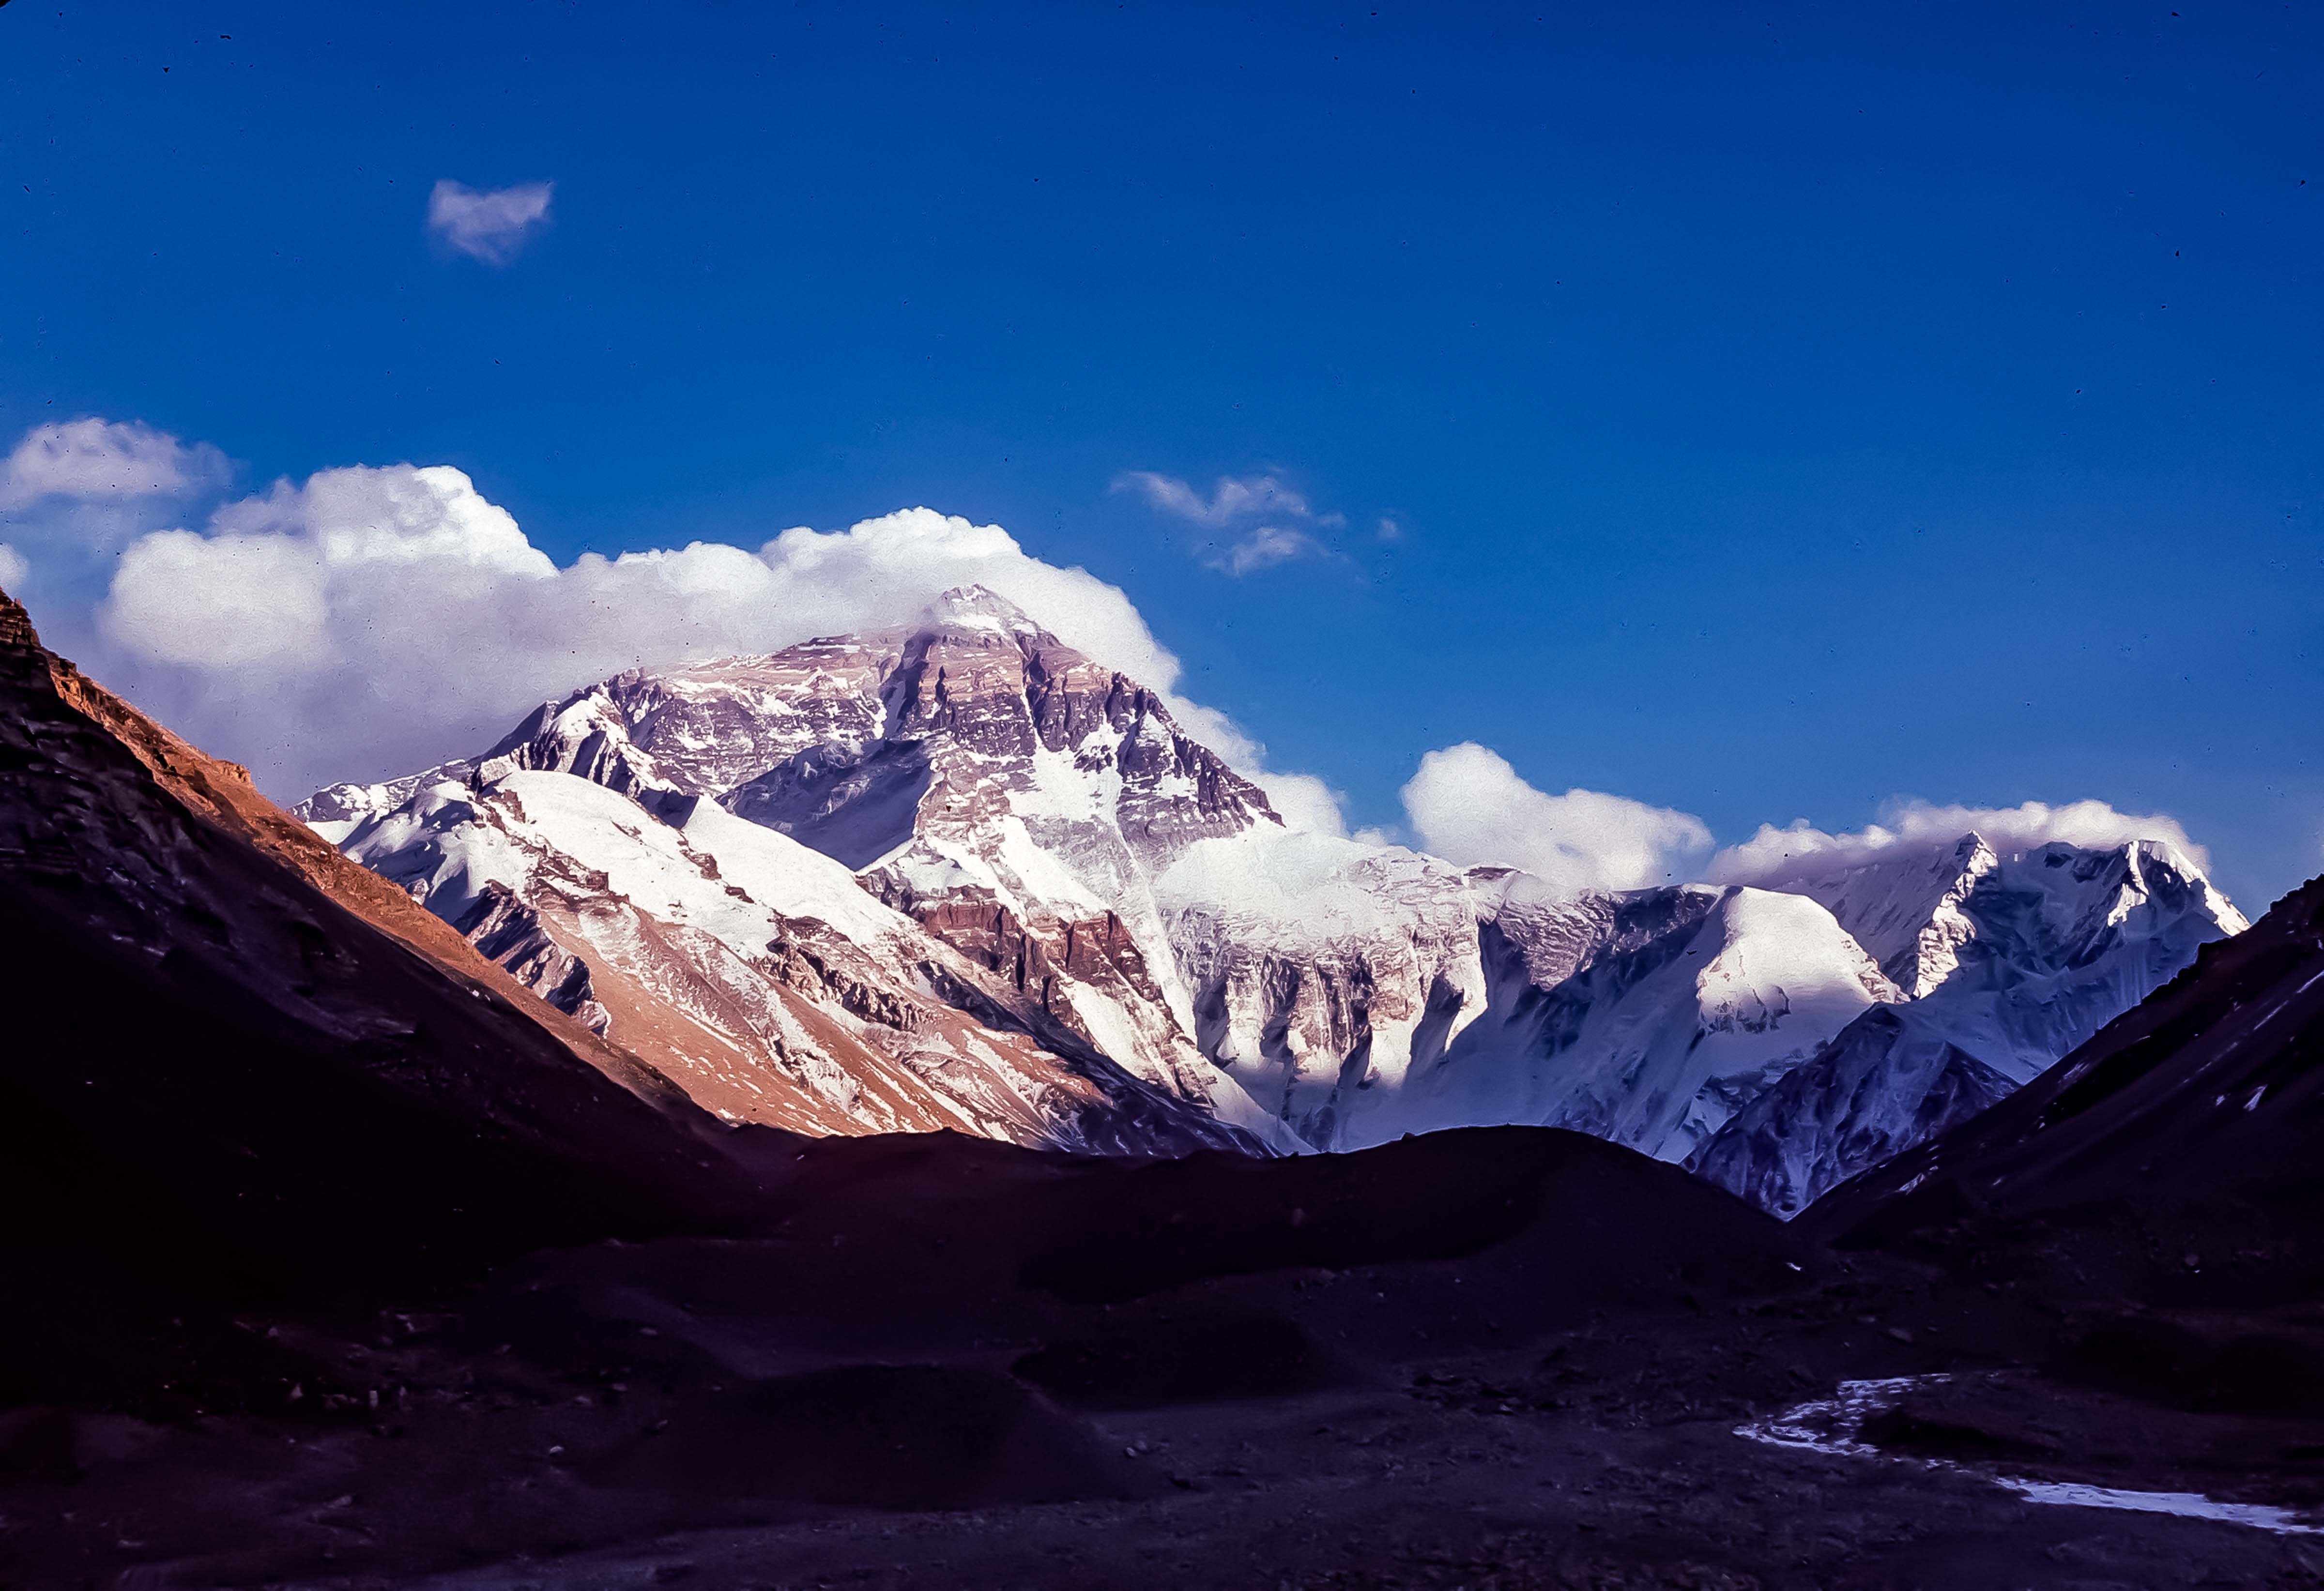 Tibet, Everest, View From Base Camp, North East Ridge And West Ridge,1995